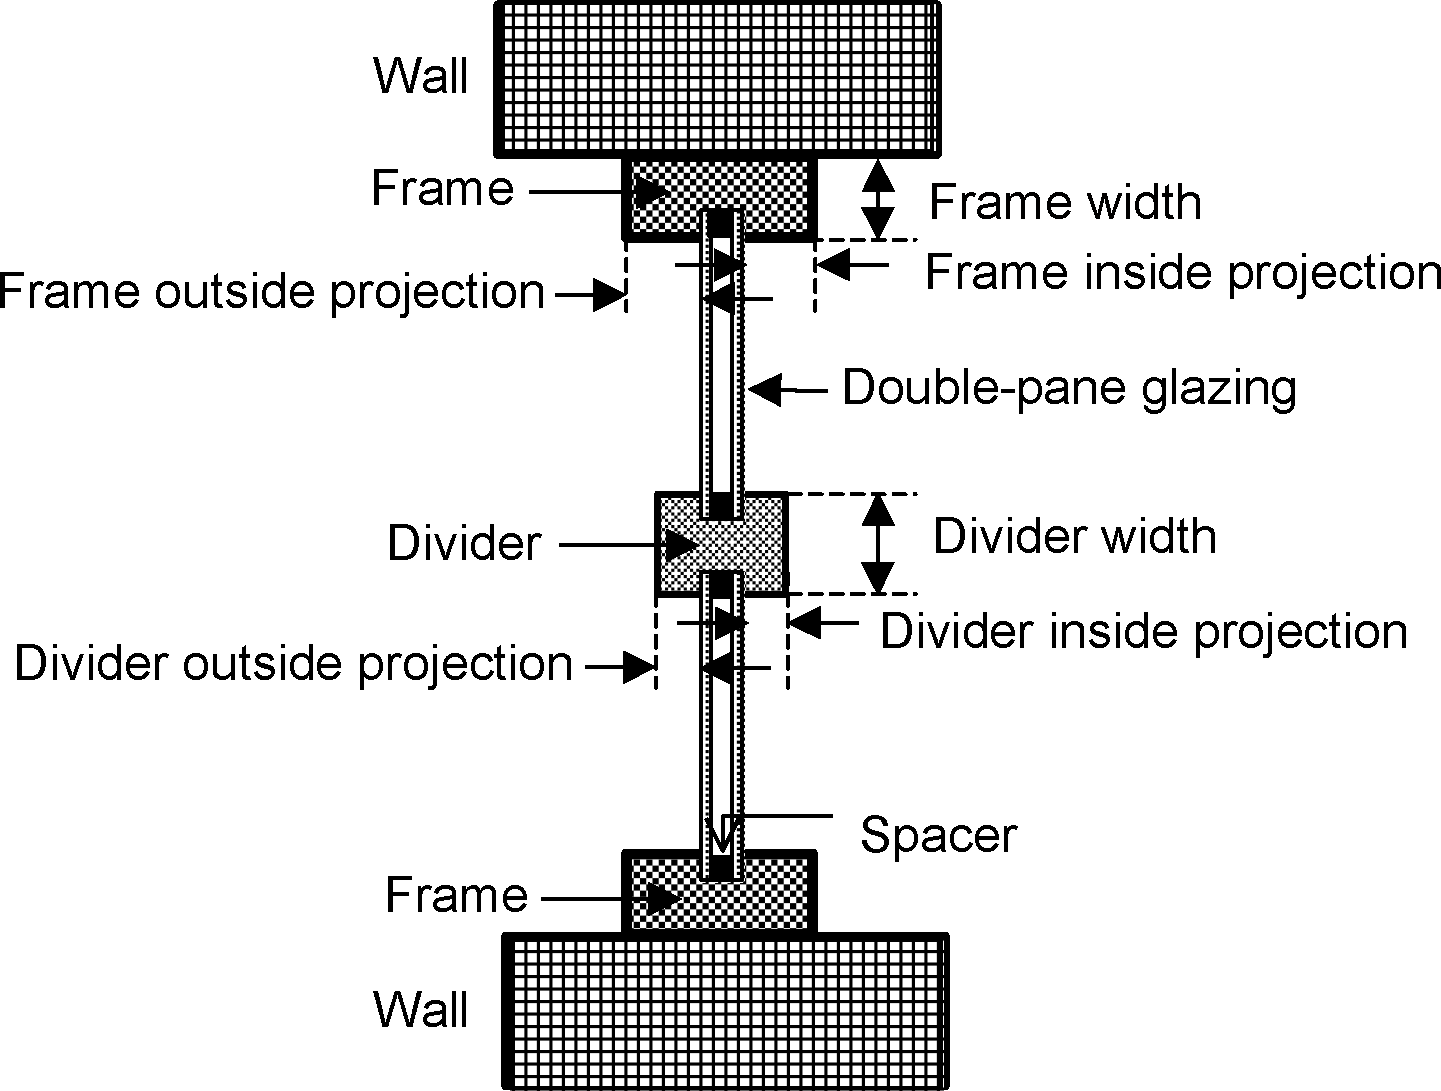 Cross section through a window showing frame and divider (exaggerated horizontally).